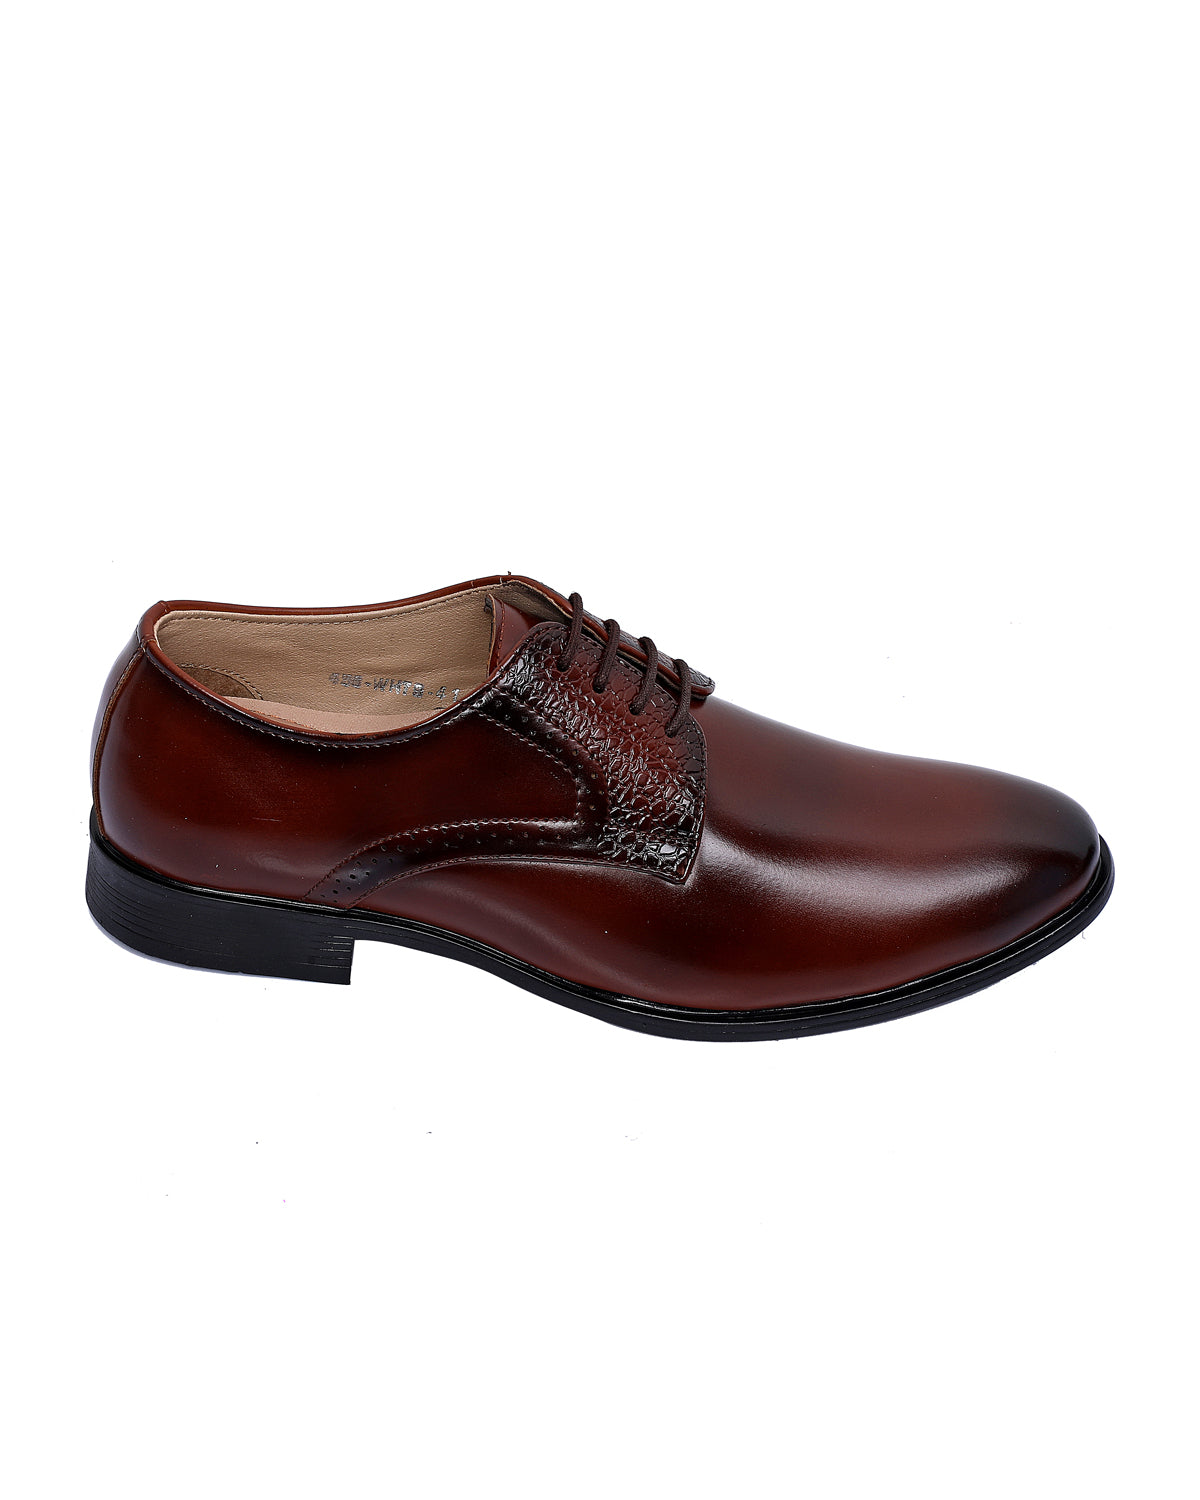 Solid Derby Shoes with Lace-Up Closure - Coffee Brown